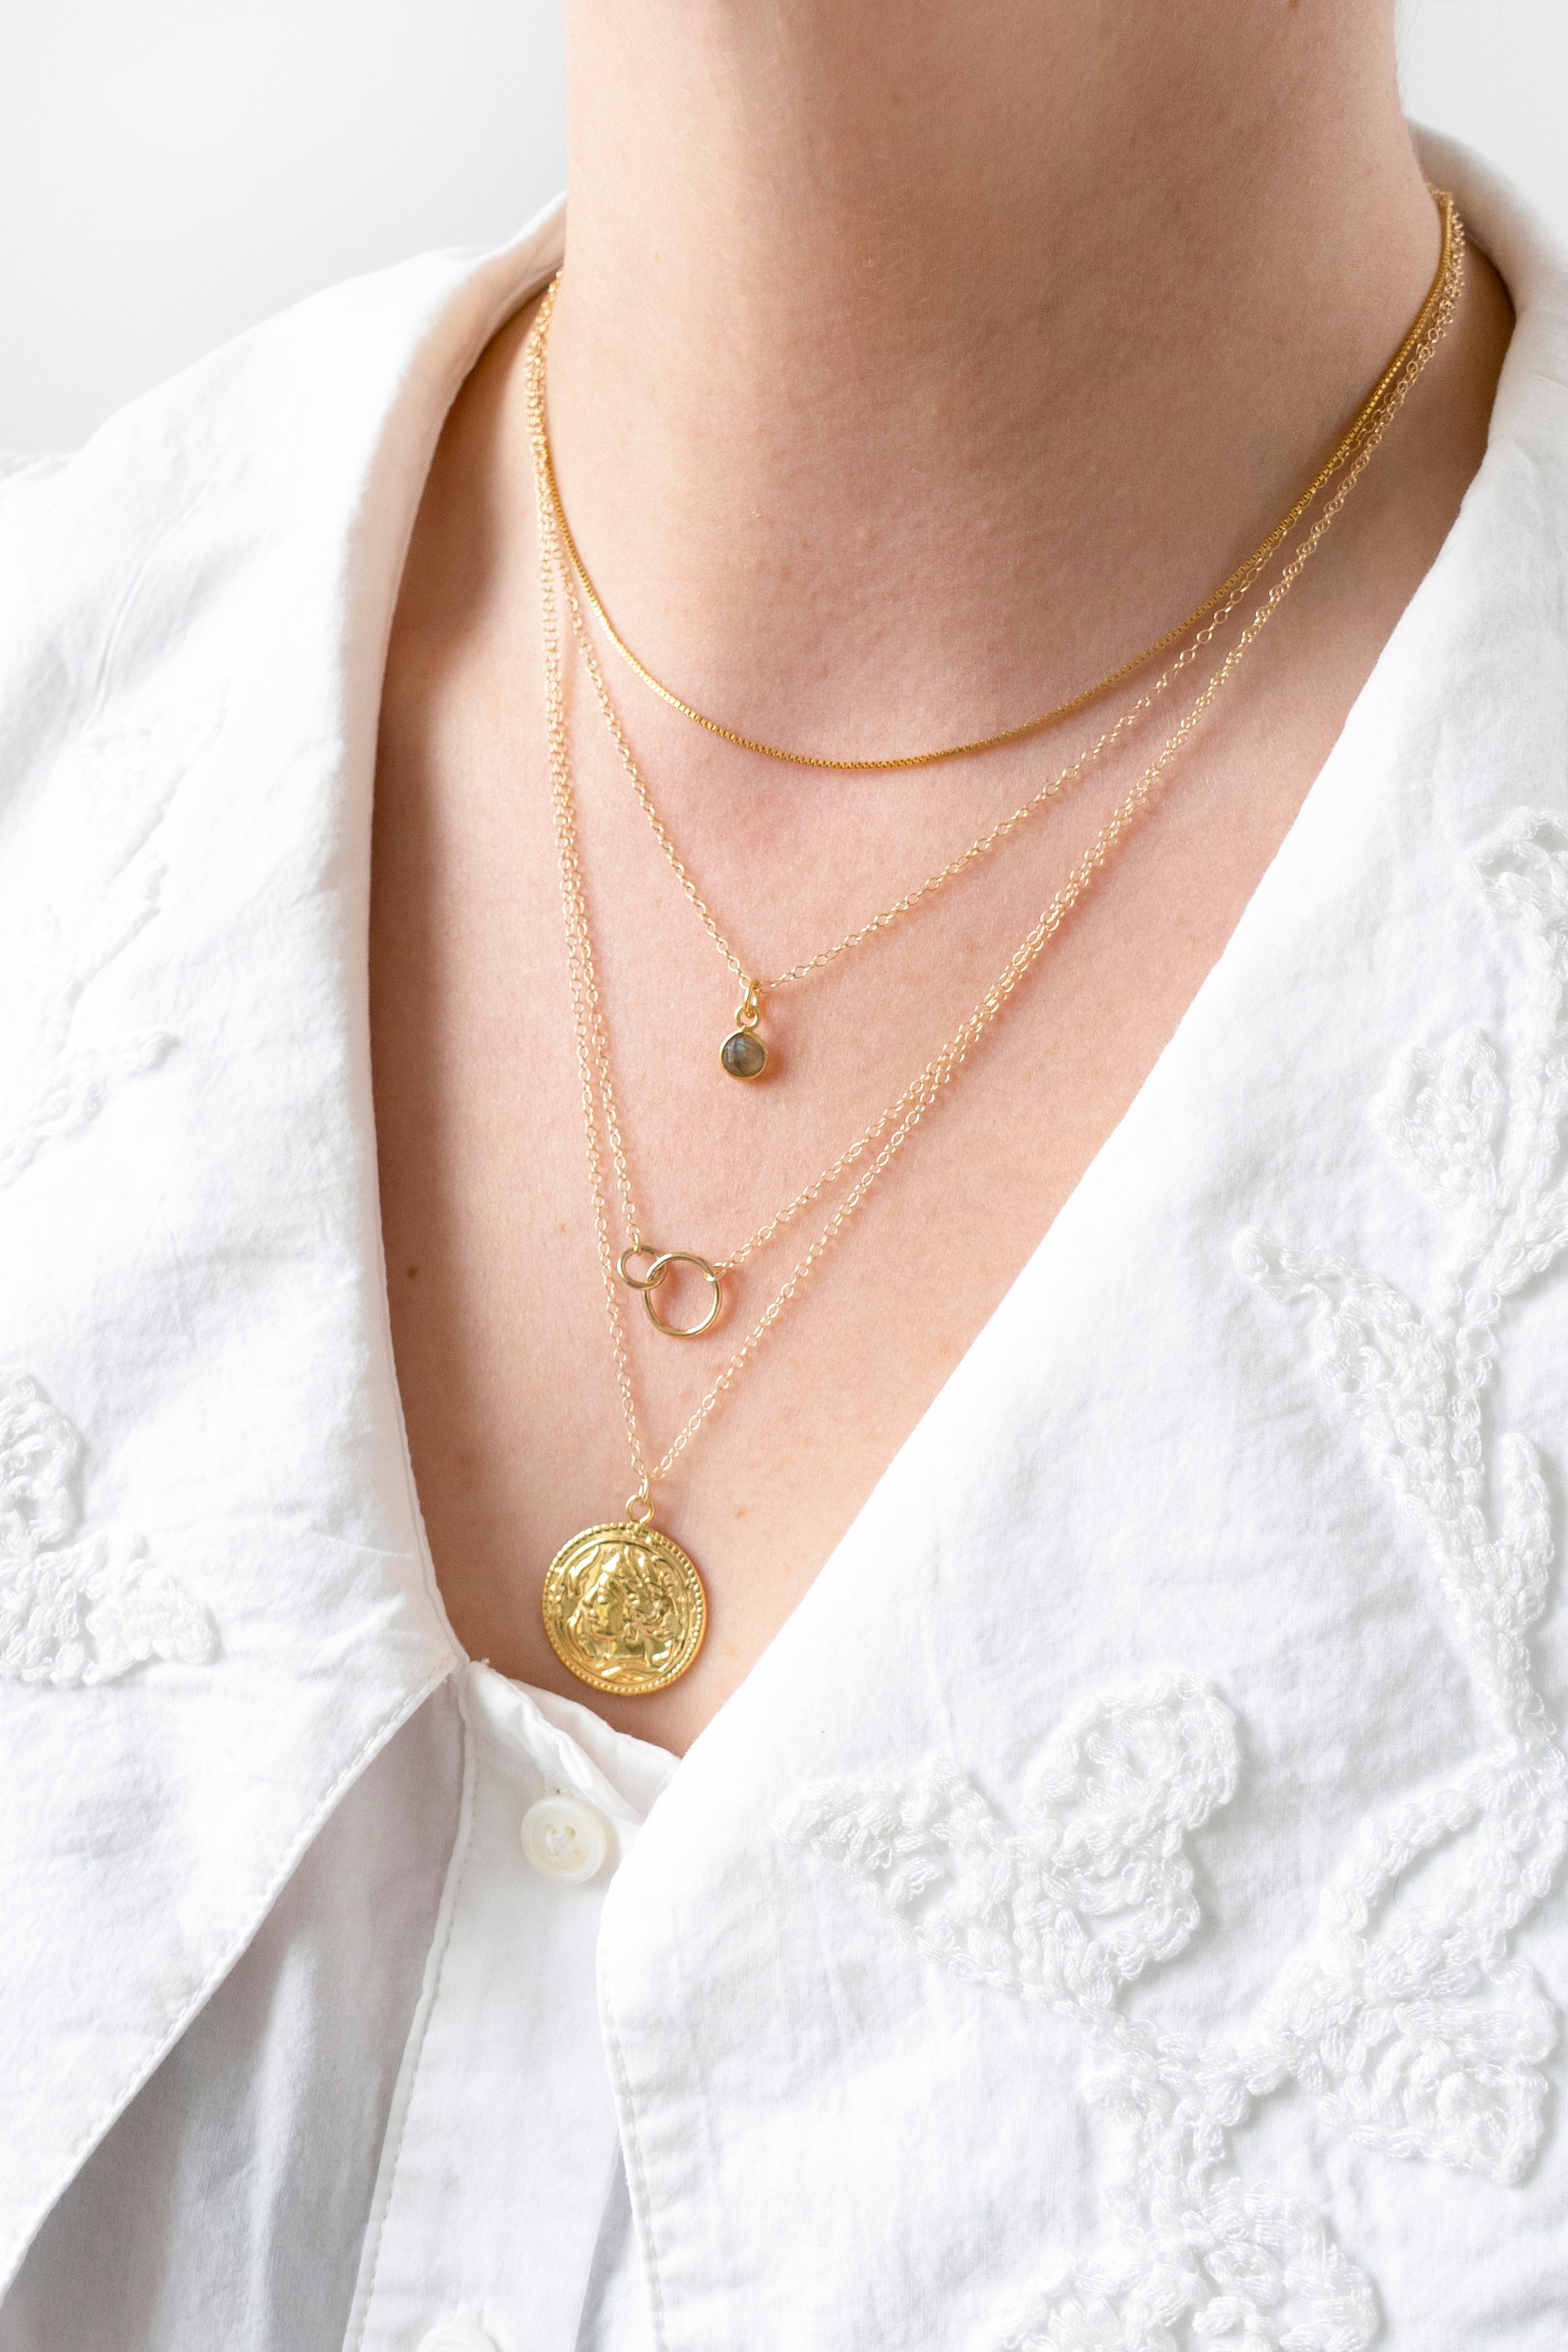 How to Choose the Right Necklace Length